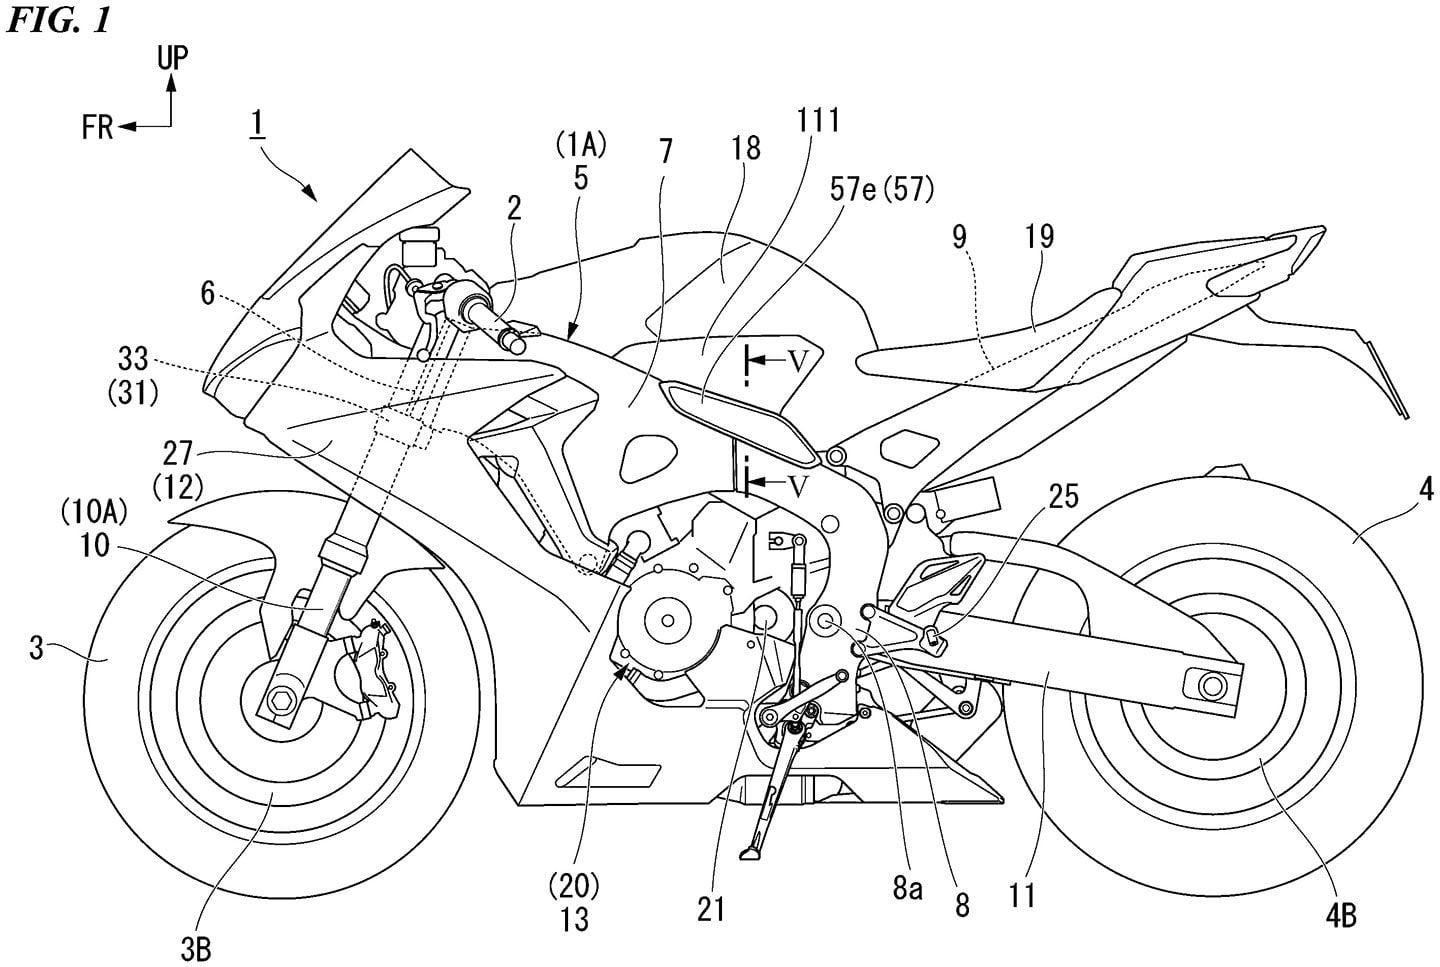 Honda is working on solutions to reduce rider fatalities by 2050. Informing the rider when automated systems intervene is part of the puzzle it’s trying to solve.